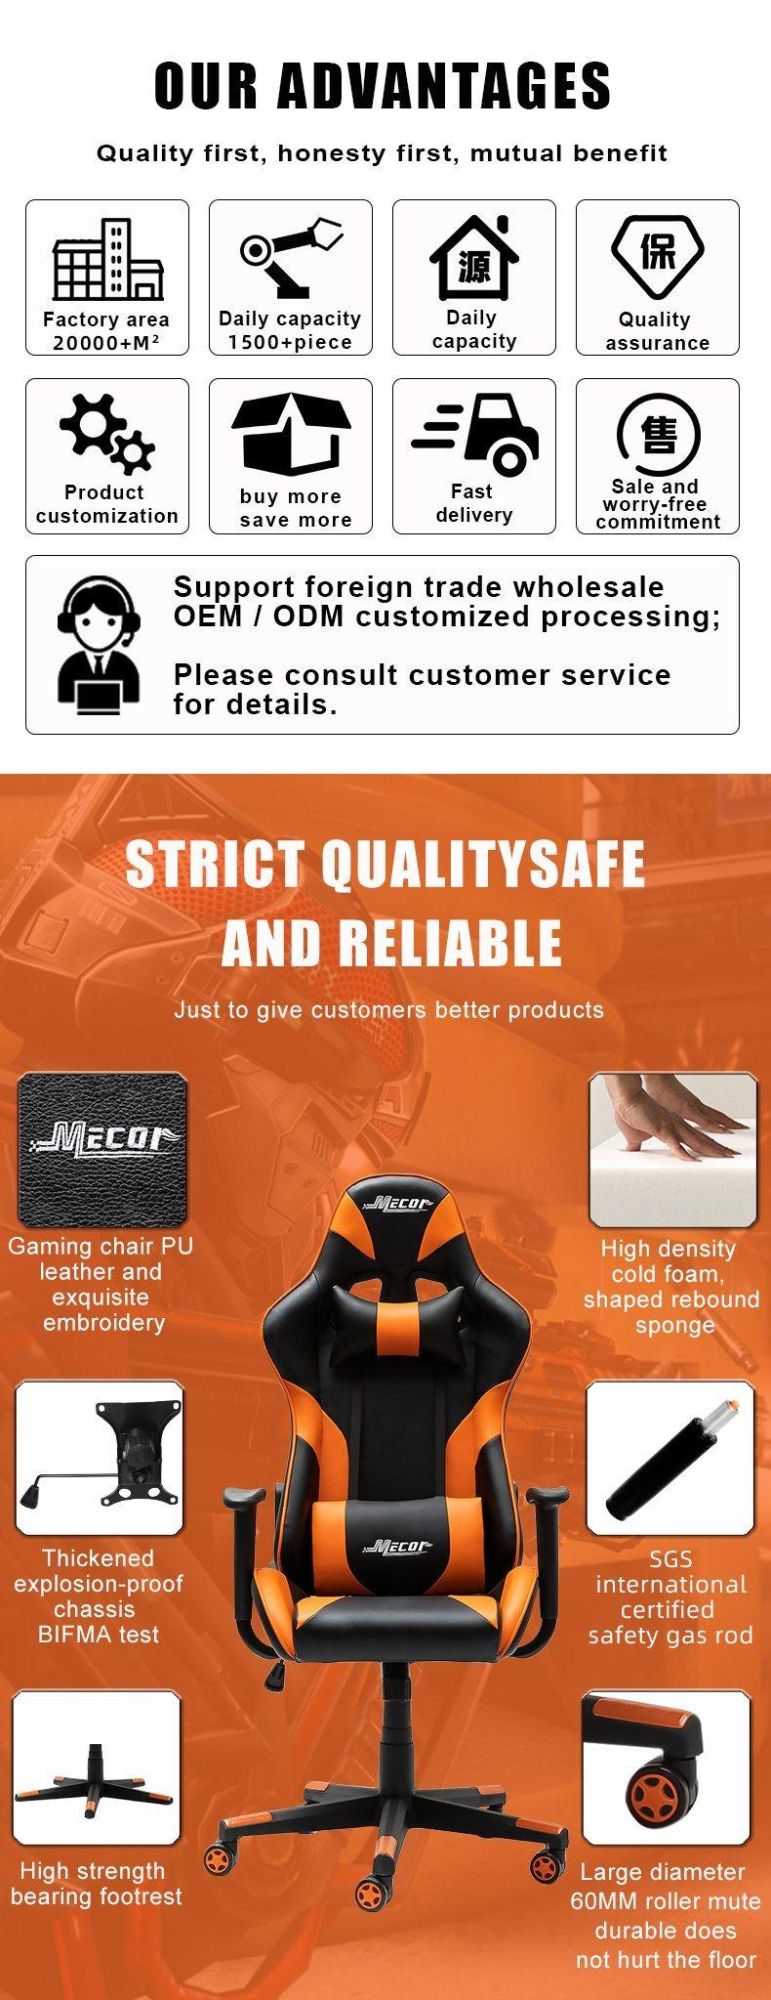 High Quality PU Leather Ergonomic Swivel Chair Adjustable Computer Gaming Chair